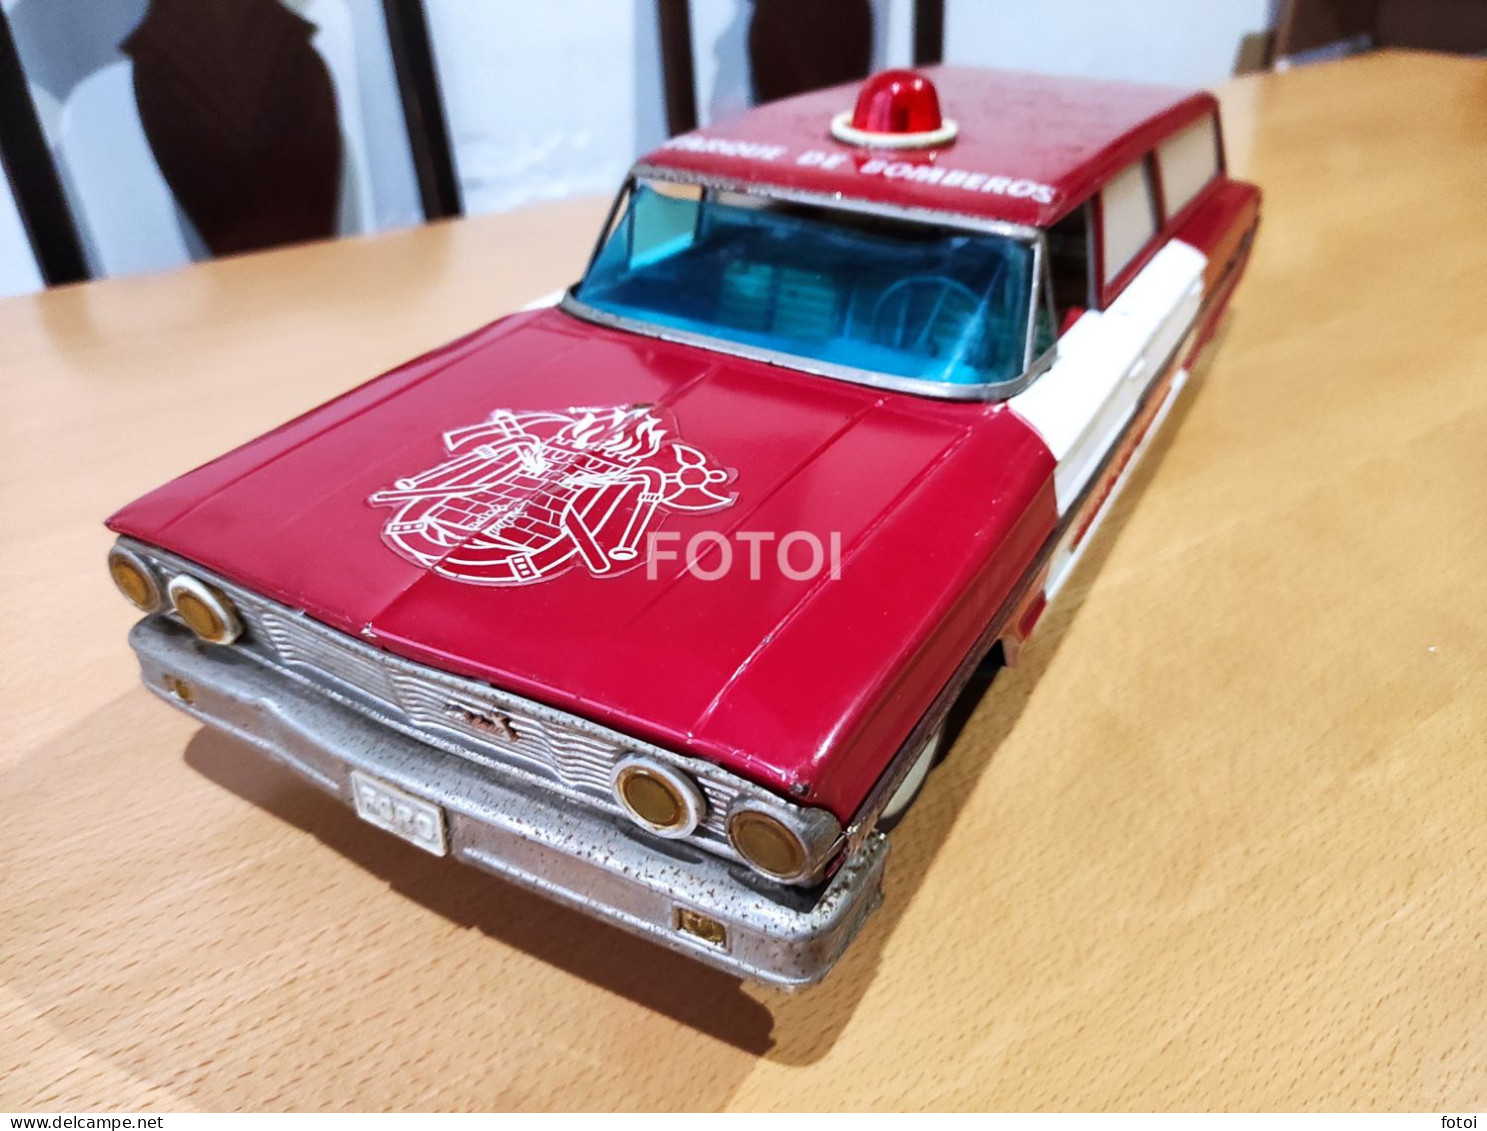 LARGE TIN CAR FORD GALAXIE FIRE CHIEF AMBULANCE RICO SPAIN ESPANA BATTERY OPERATED - Schaal 1:160